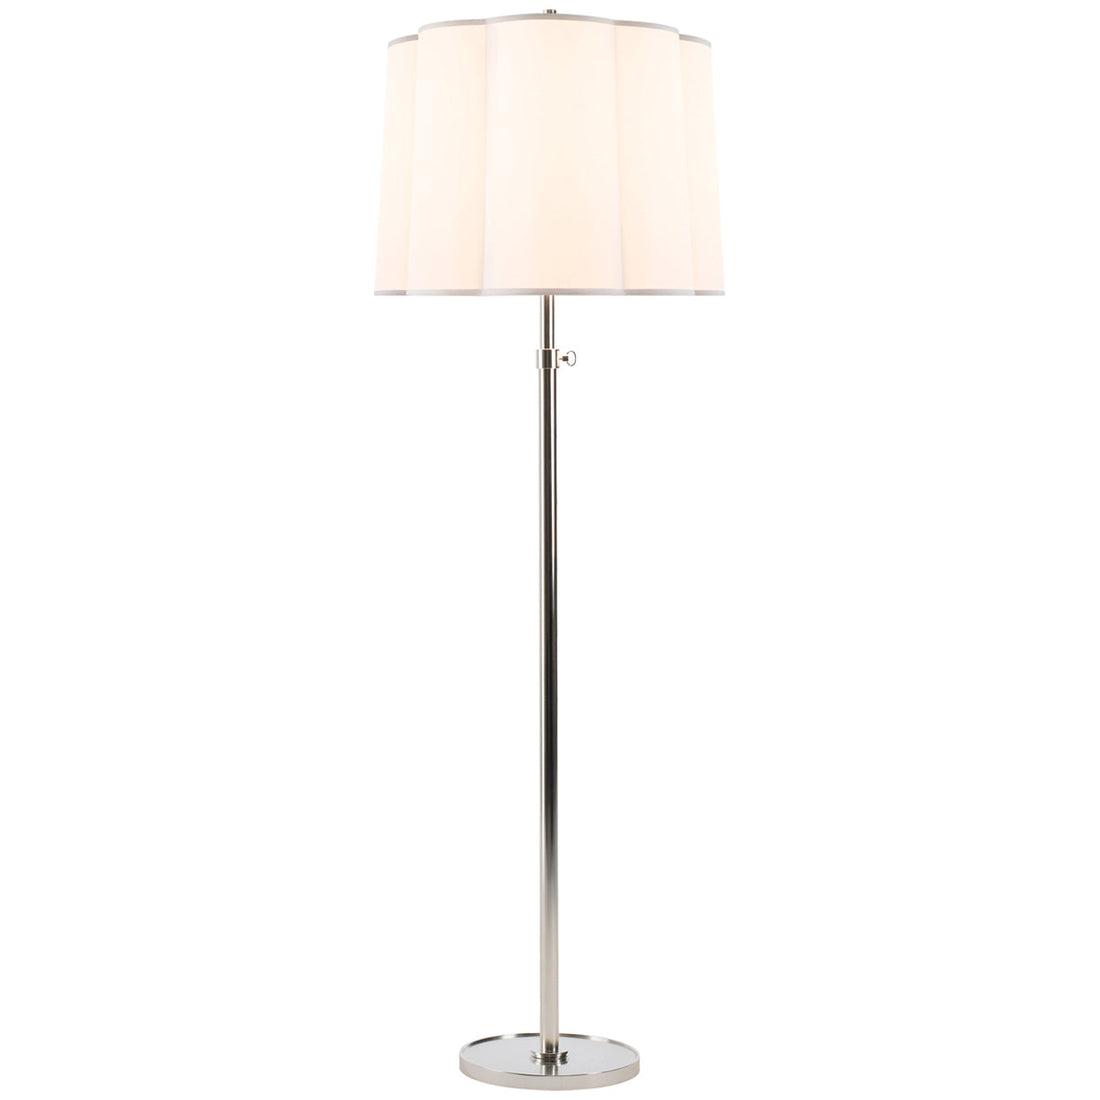 Visual Comfort Simple Floor Lamp with Silk Scalloped Shade